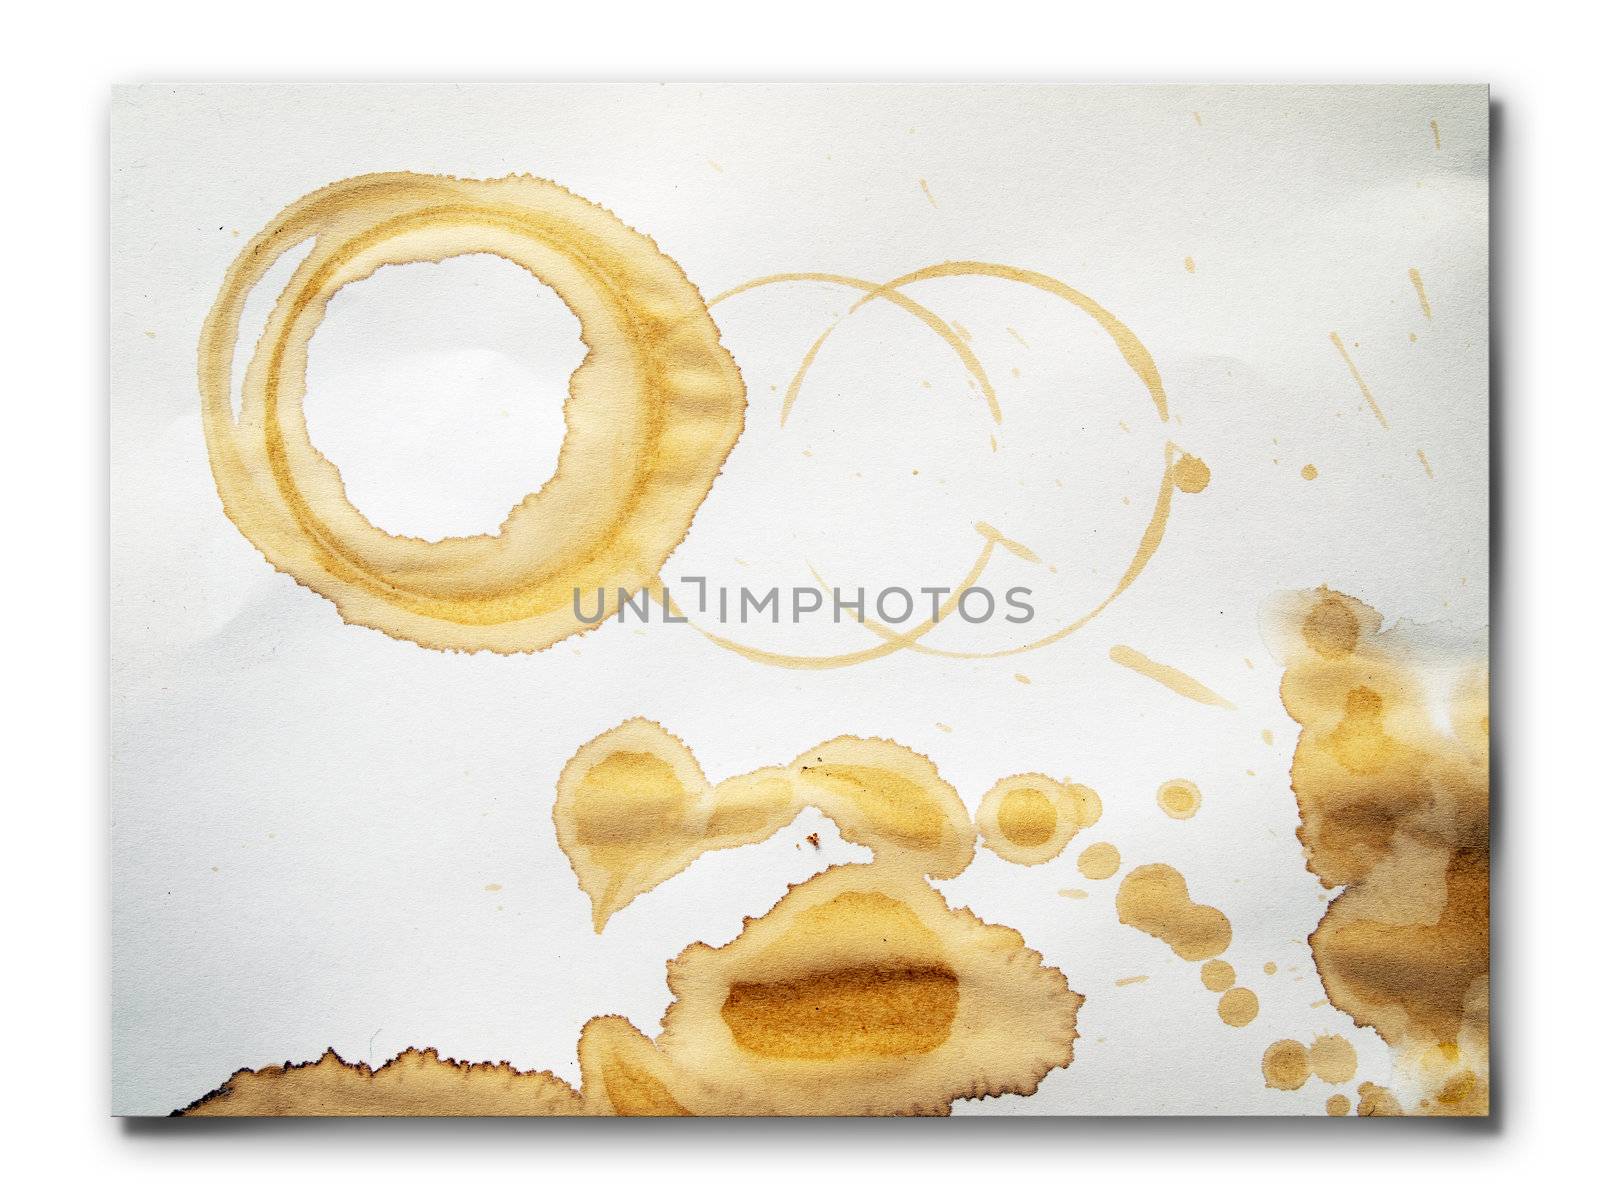 Coffee stains on the white paper